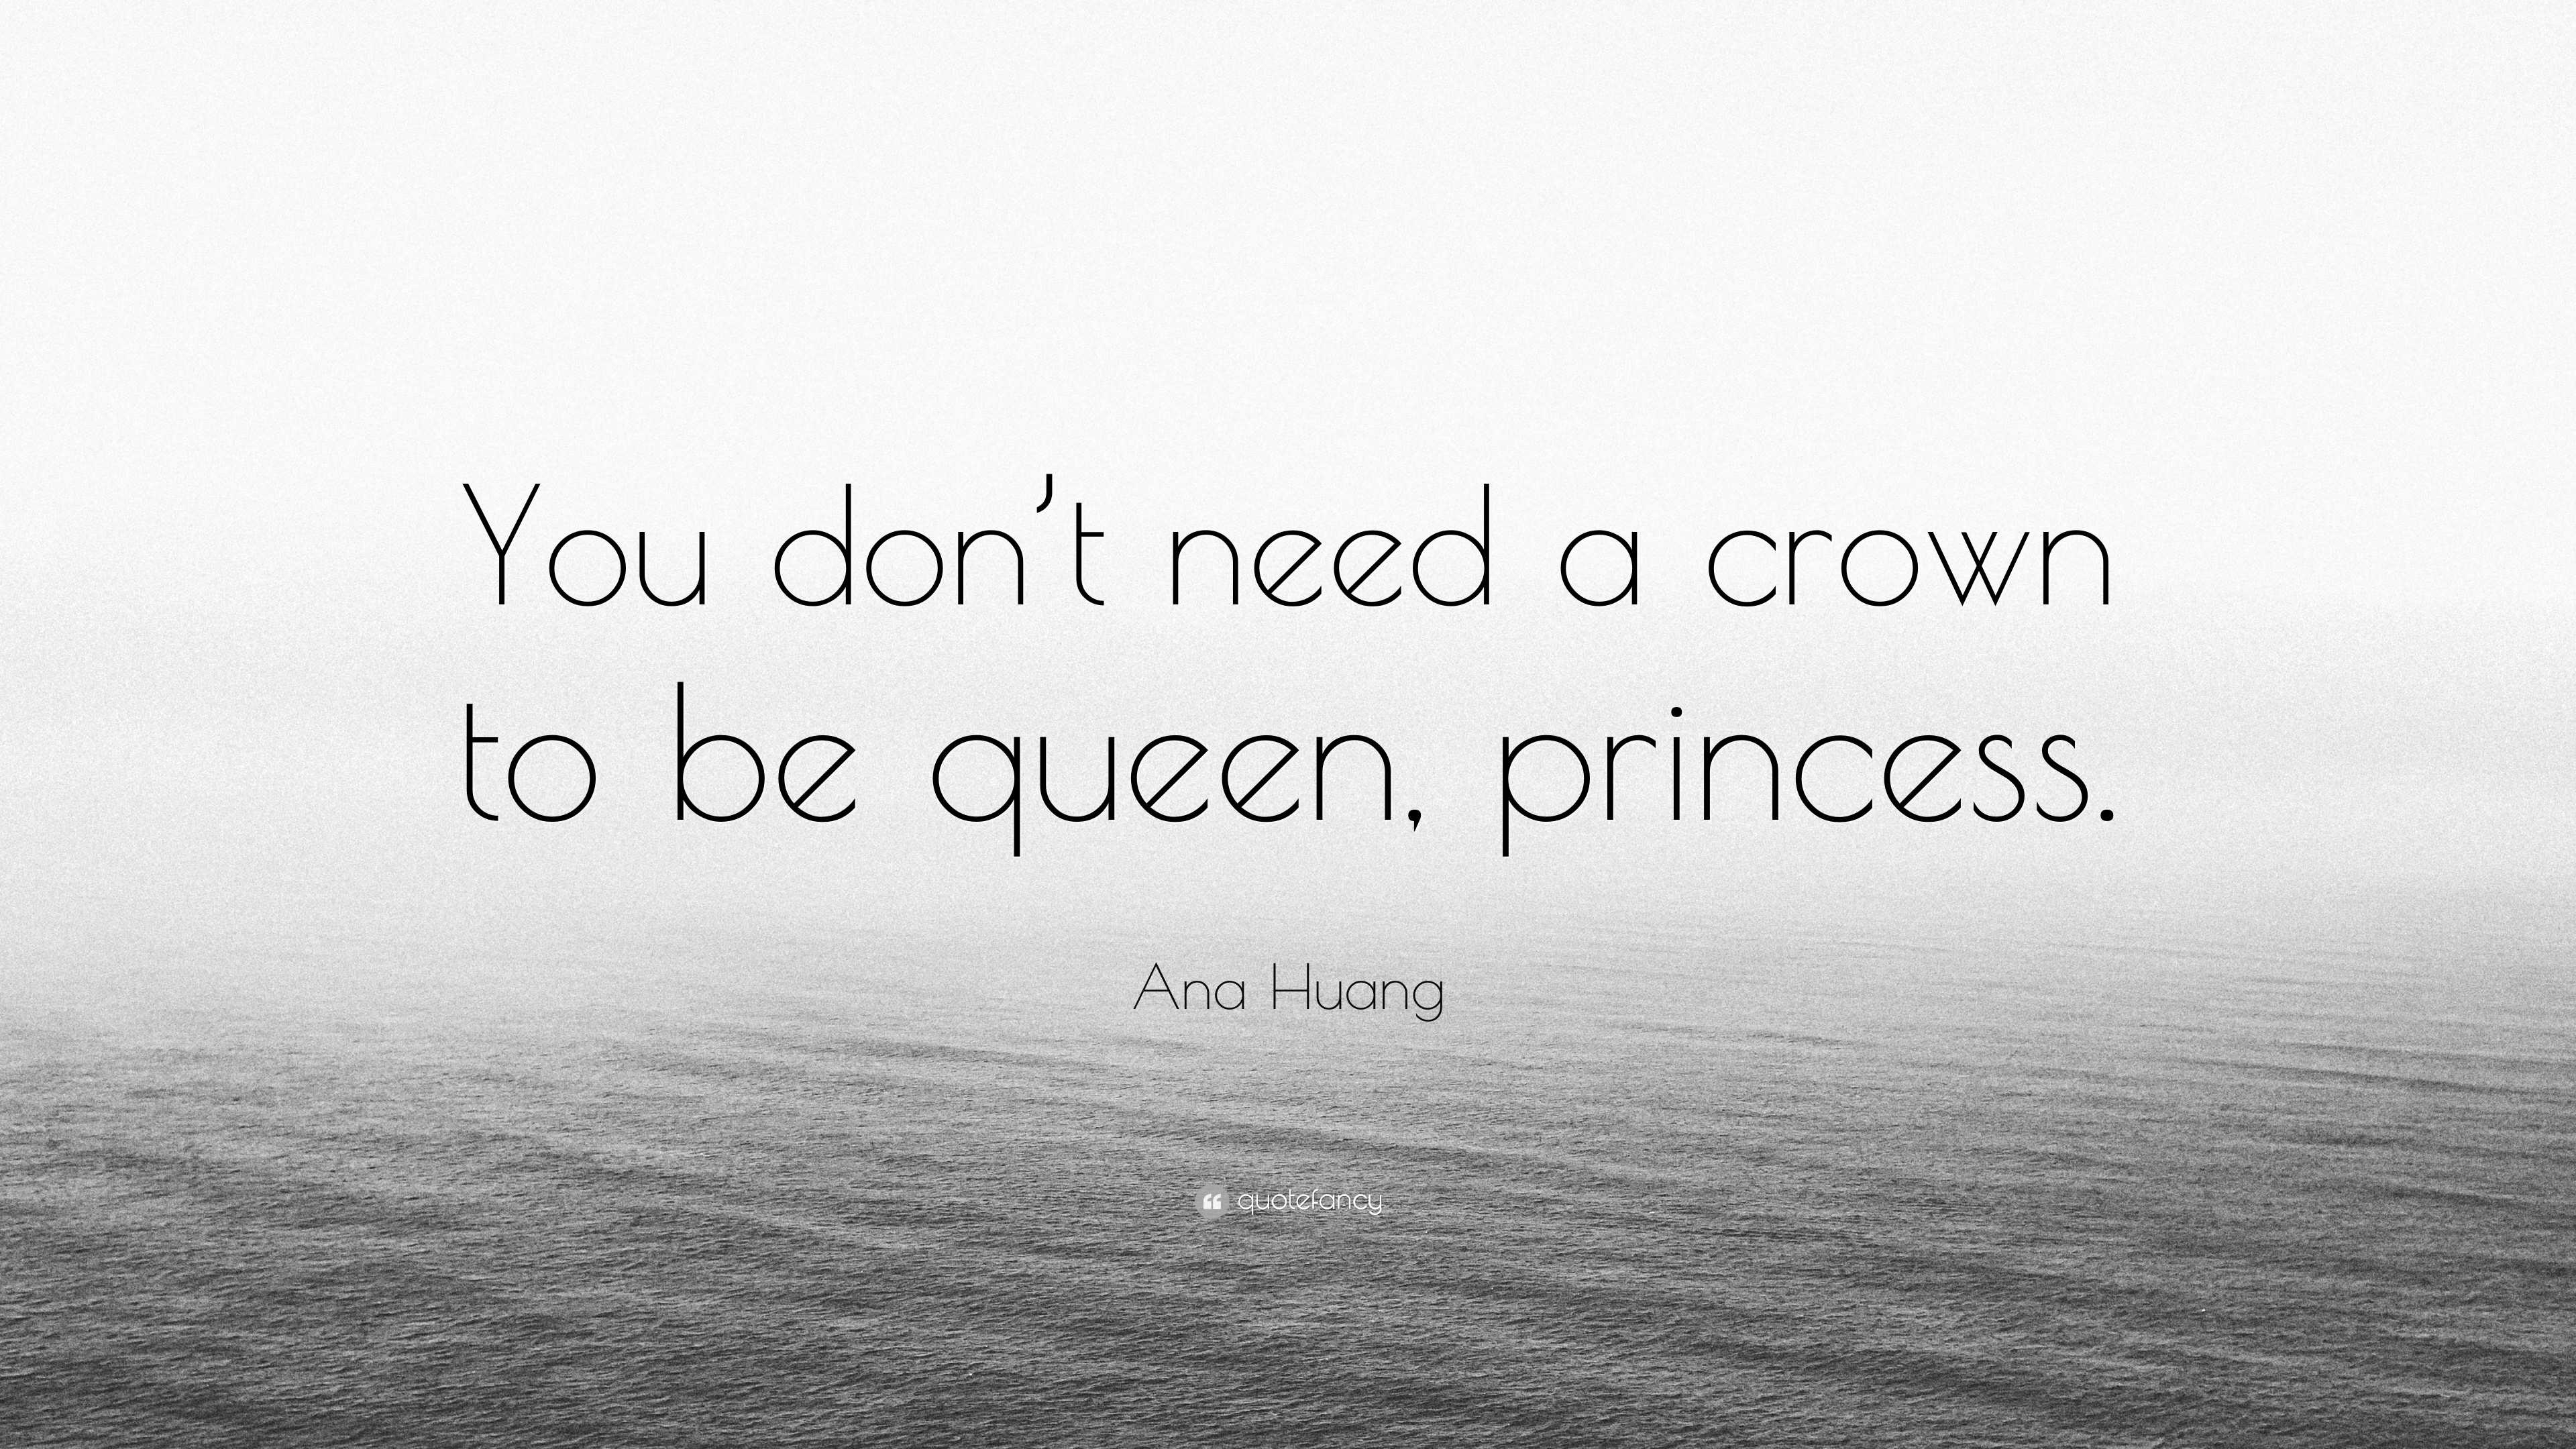 Ana Huang Quote: “You don’t need a crown to be queen, princess.”